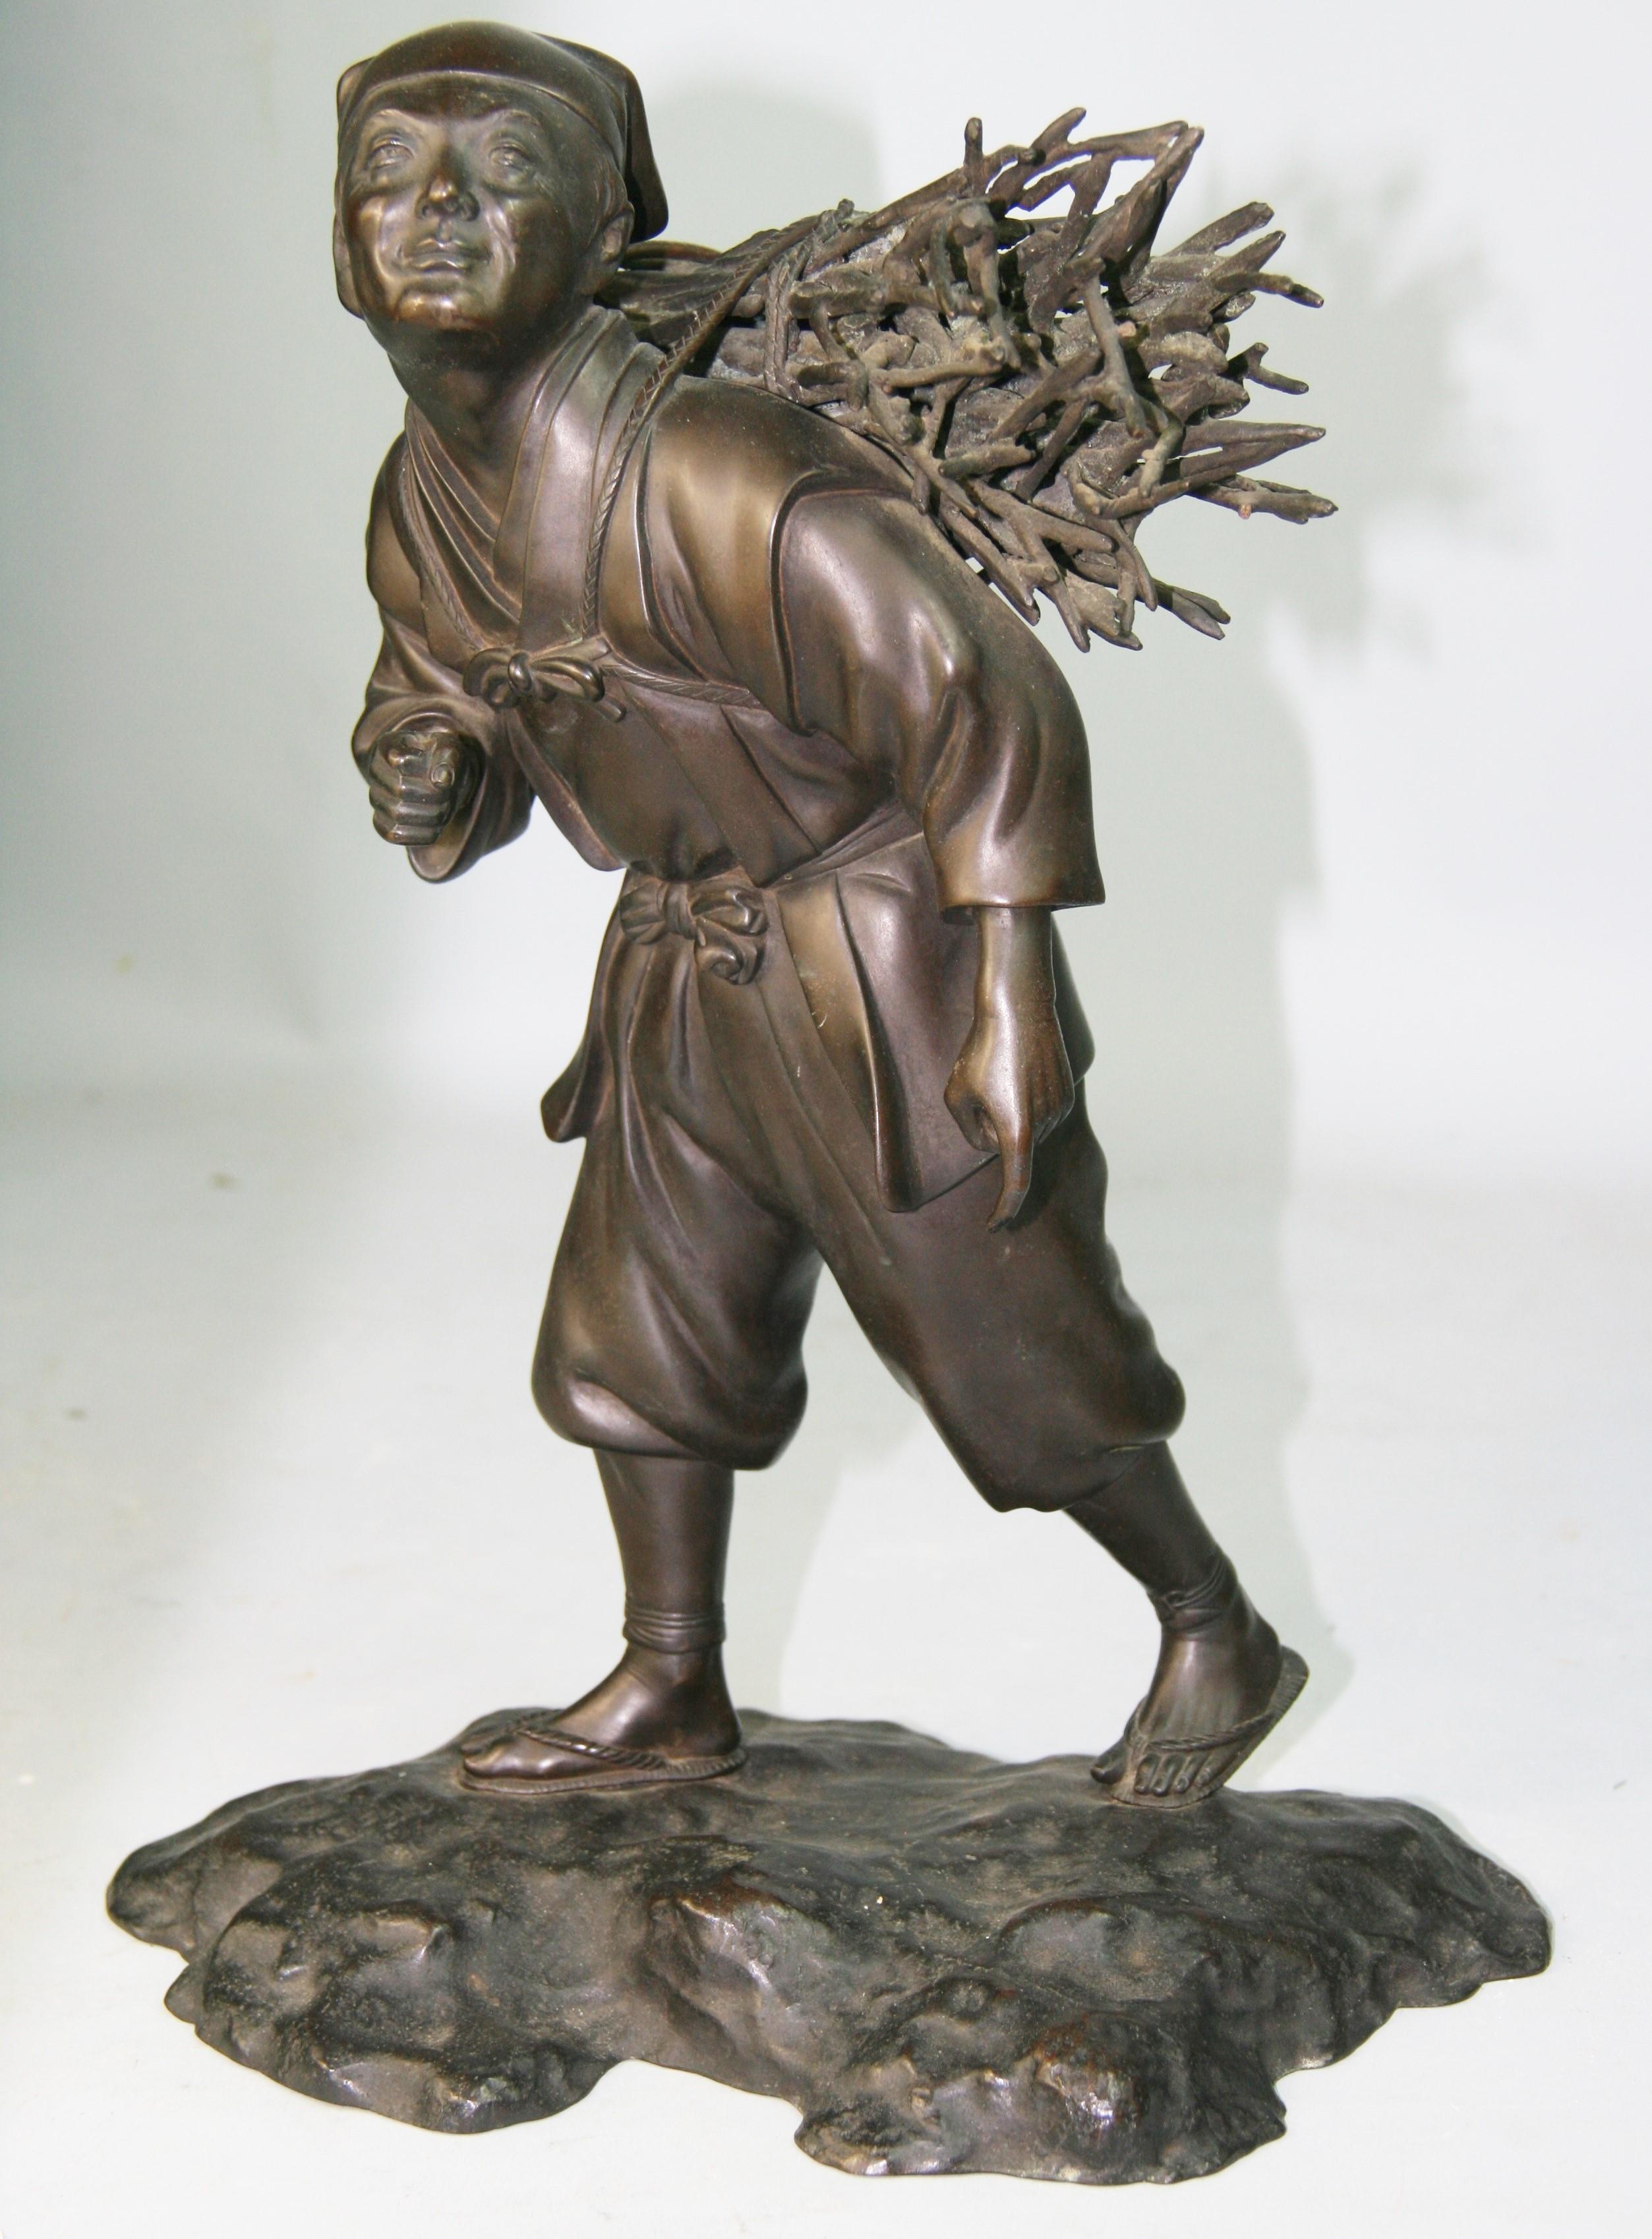 1351 Japanese bronze sculpture of a worker carrying wood.
Incredible detail.